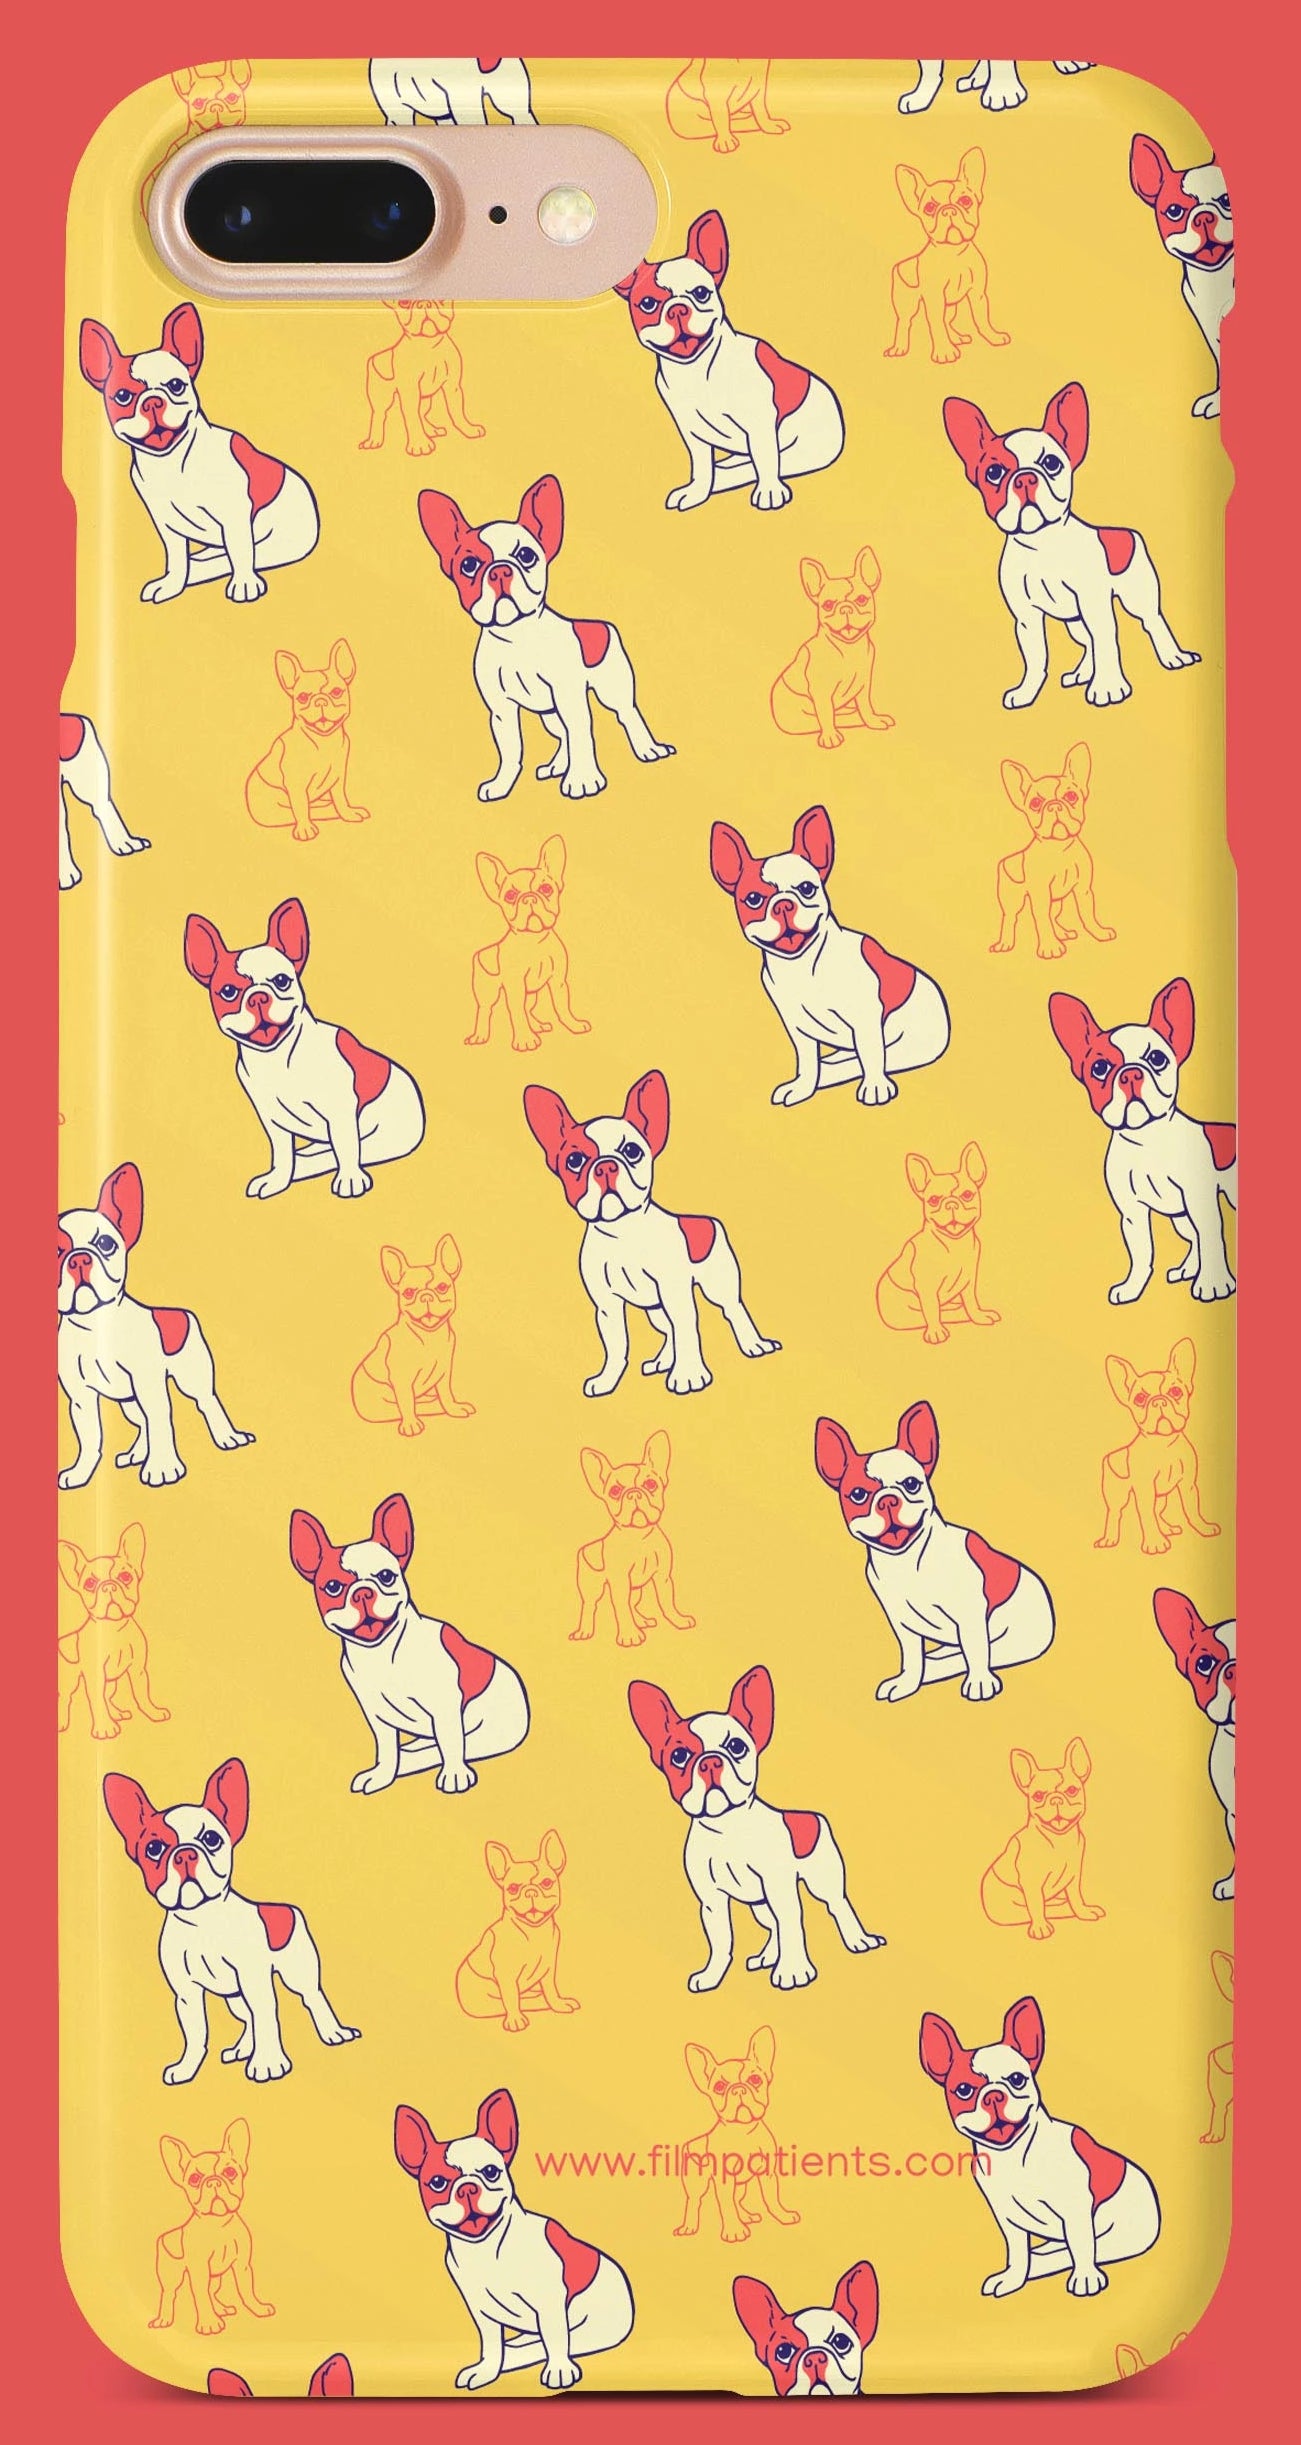 Dog Love Mobile Cover | Film Patients